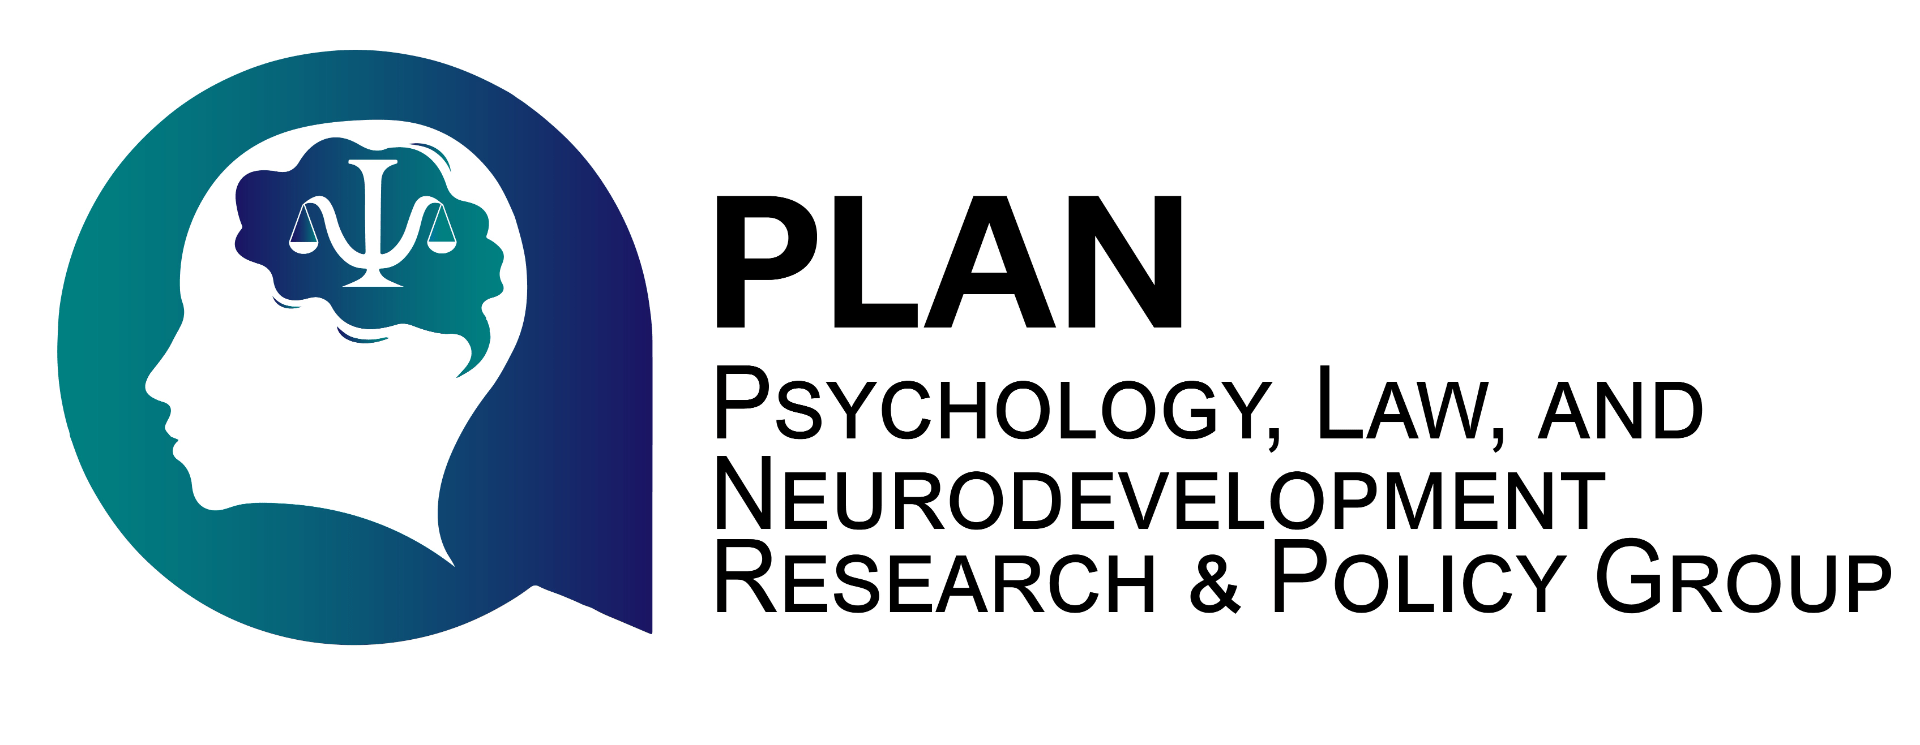 Psychology Law and Neurodevelopment Research & Policy Group Logo